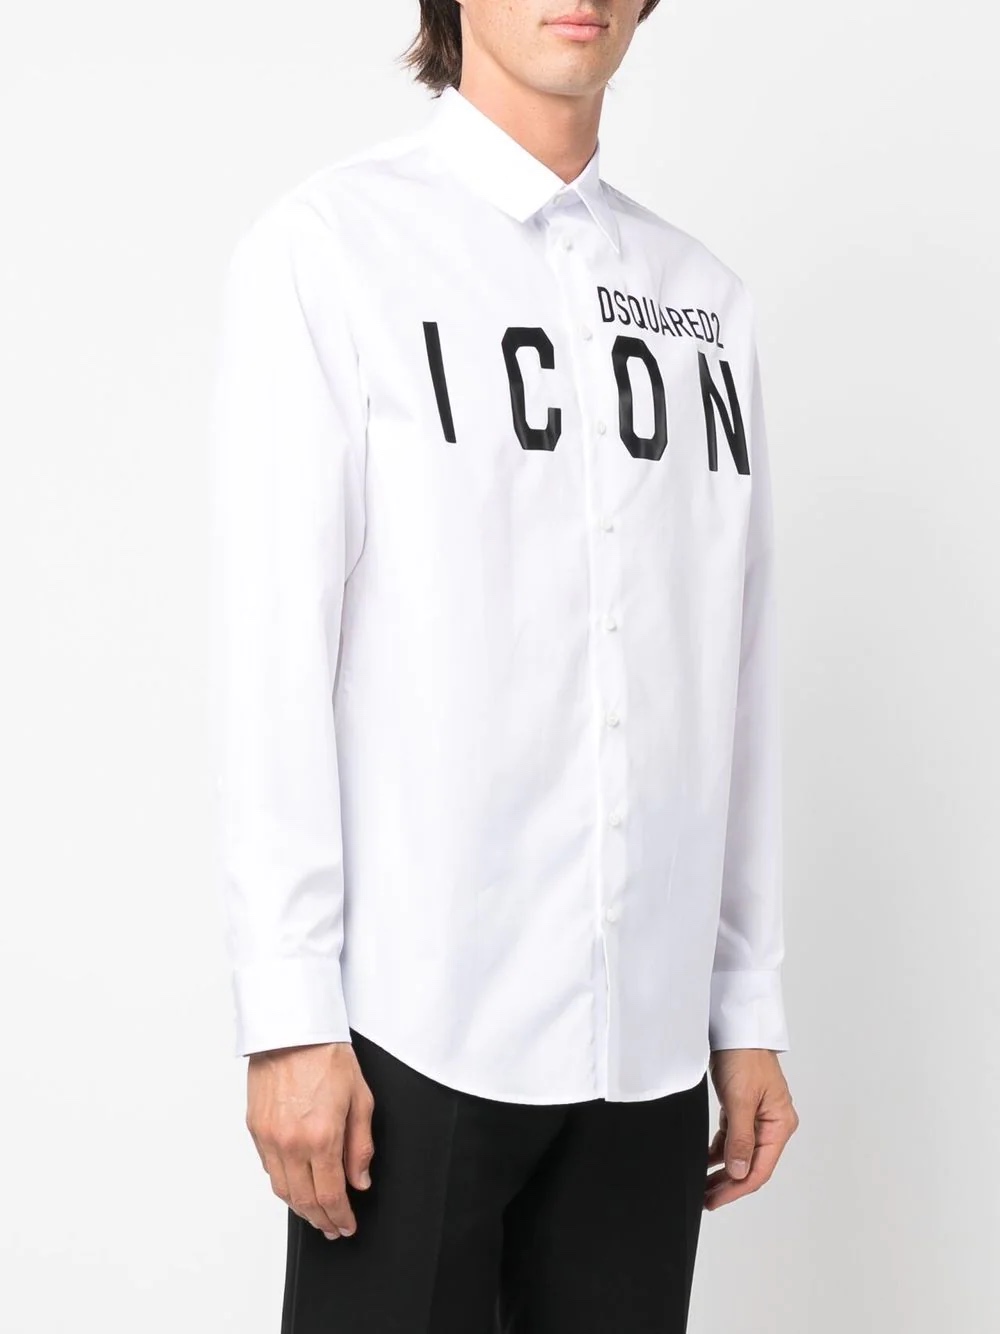 Dsquared2 Long Sleeve Shirts For Men # 269702, cheap DsQuared 2 Shirts, only $49!